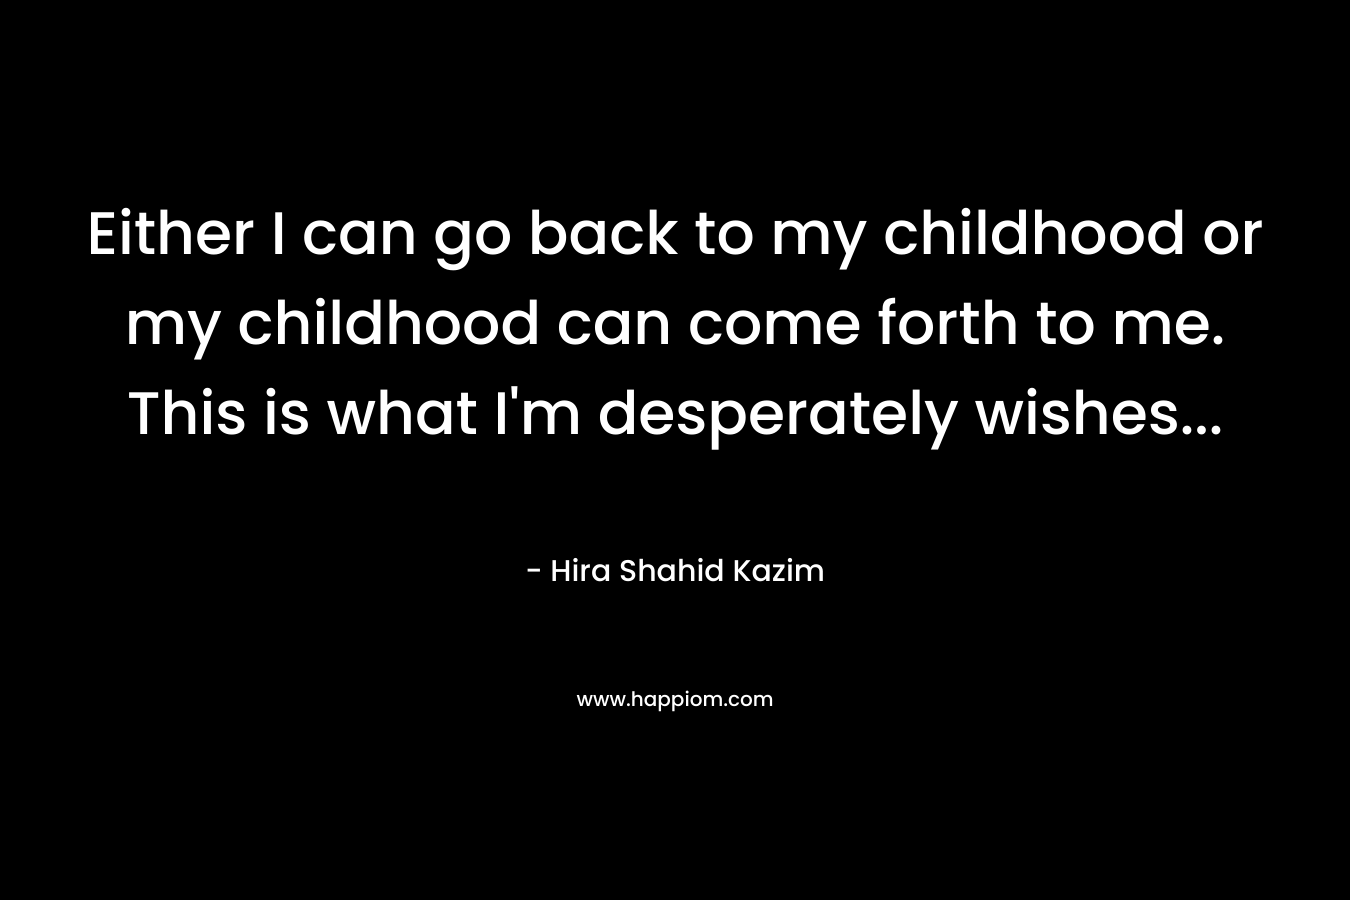 Either I can go back to my childhood or my childhood can come forth to me. This is what I’m desperately wishes… – Hira Shahid Kazim